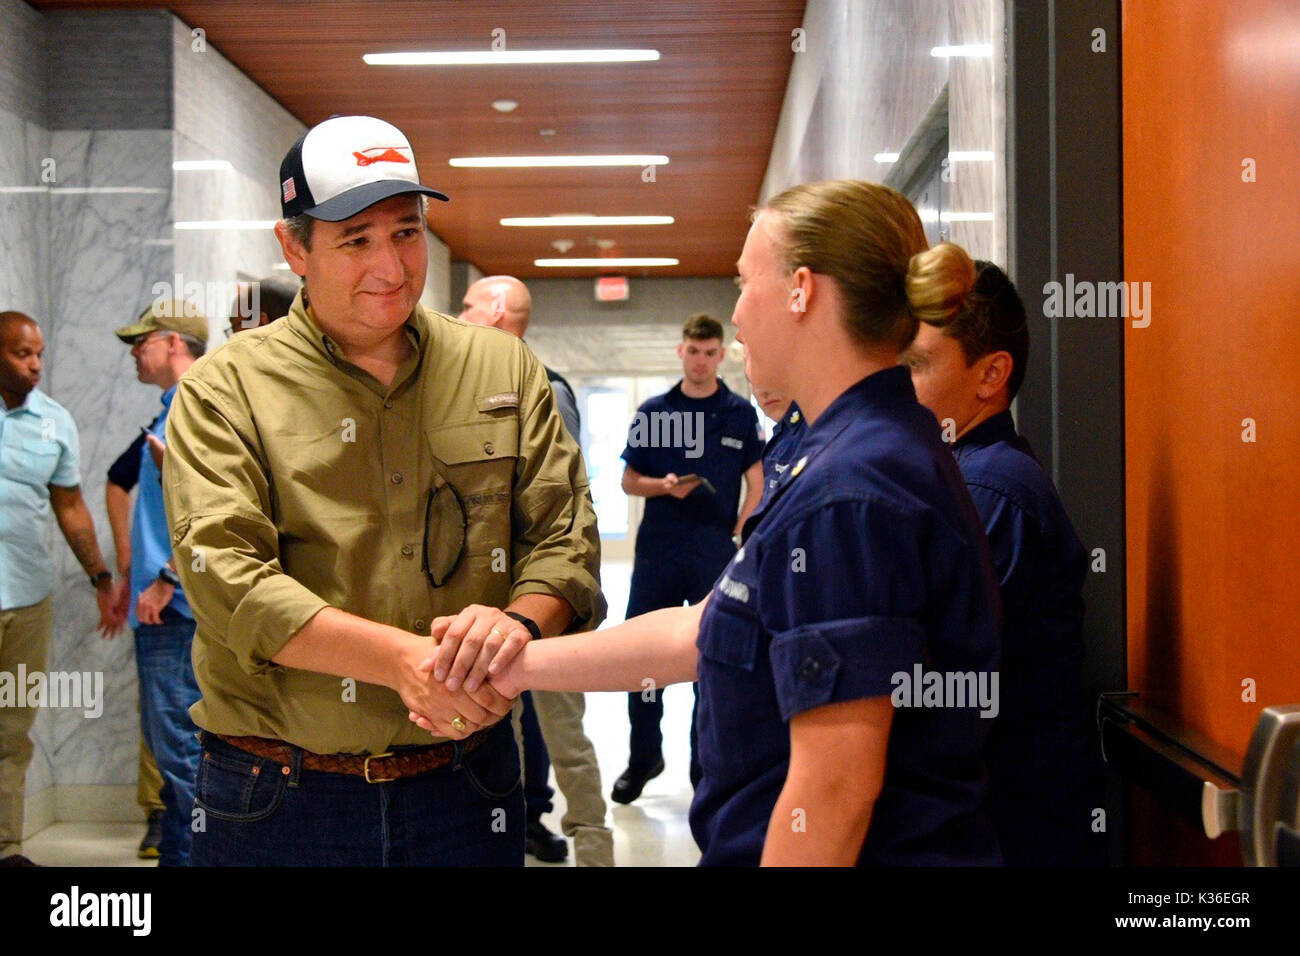 Houston, United States. 31st Aug, 2017. U.S. Senator Ted Cruz of Texas thanks a Coast Guard crew member during a visit to Sector Houston-Galveston operations center in the aftermath of Hurricane Harvey August 31, 2017 in Houston, Texas. Credit: Planetpix/Alamy Live News Stock Photo